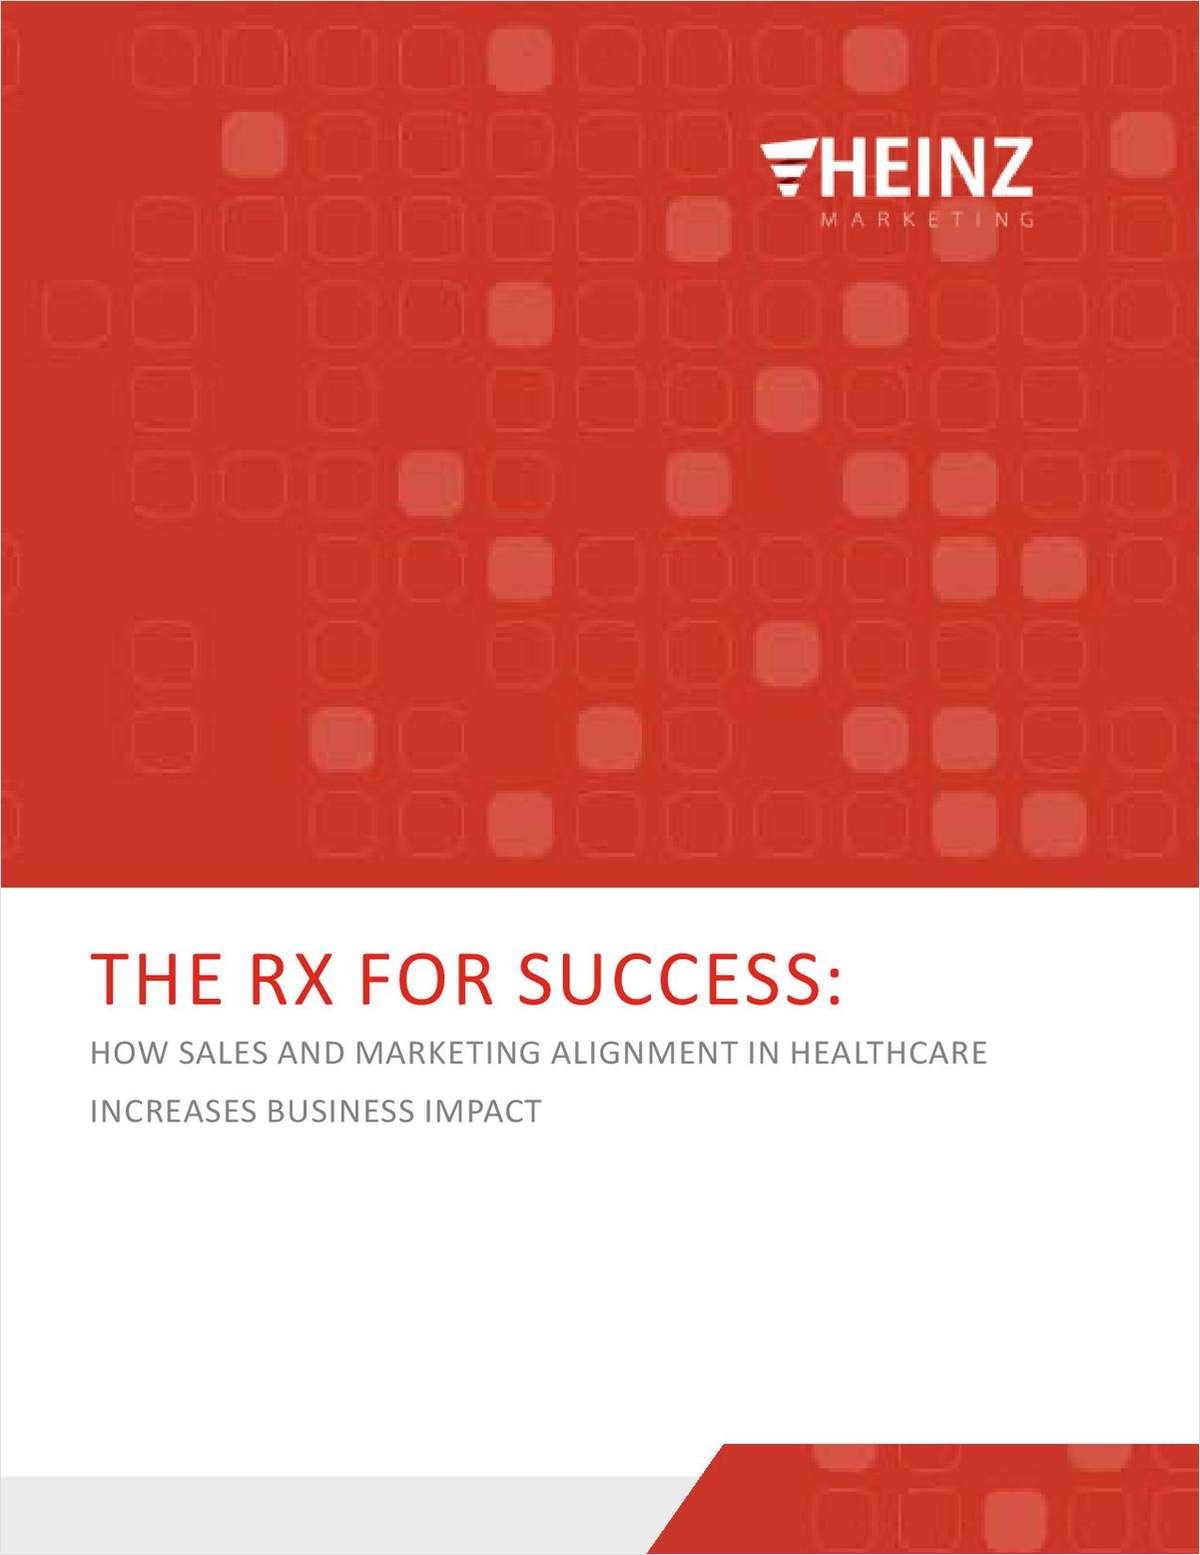 The RX for Success